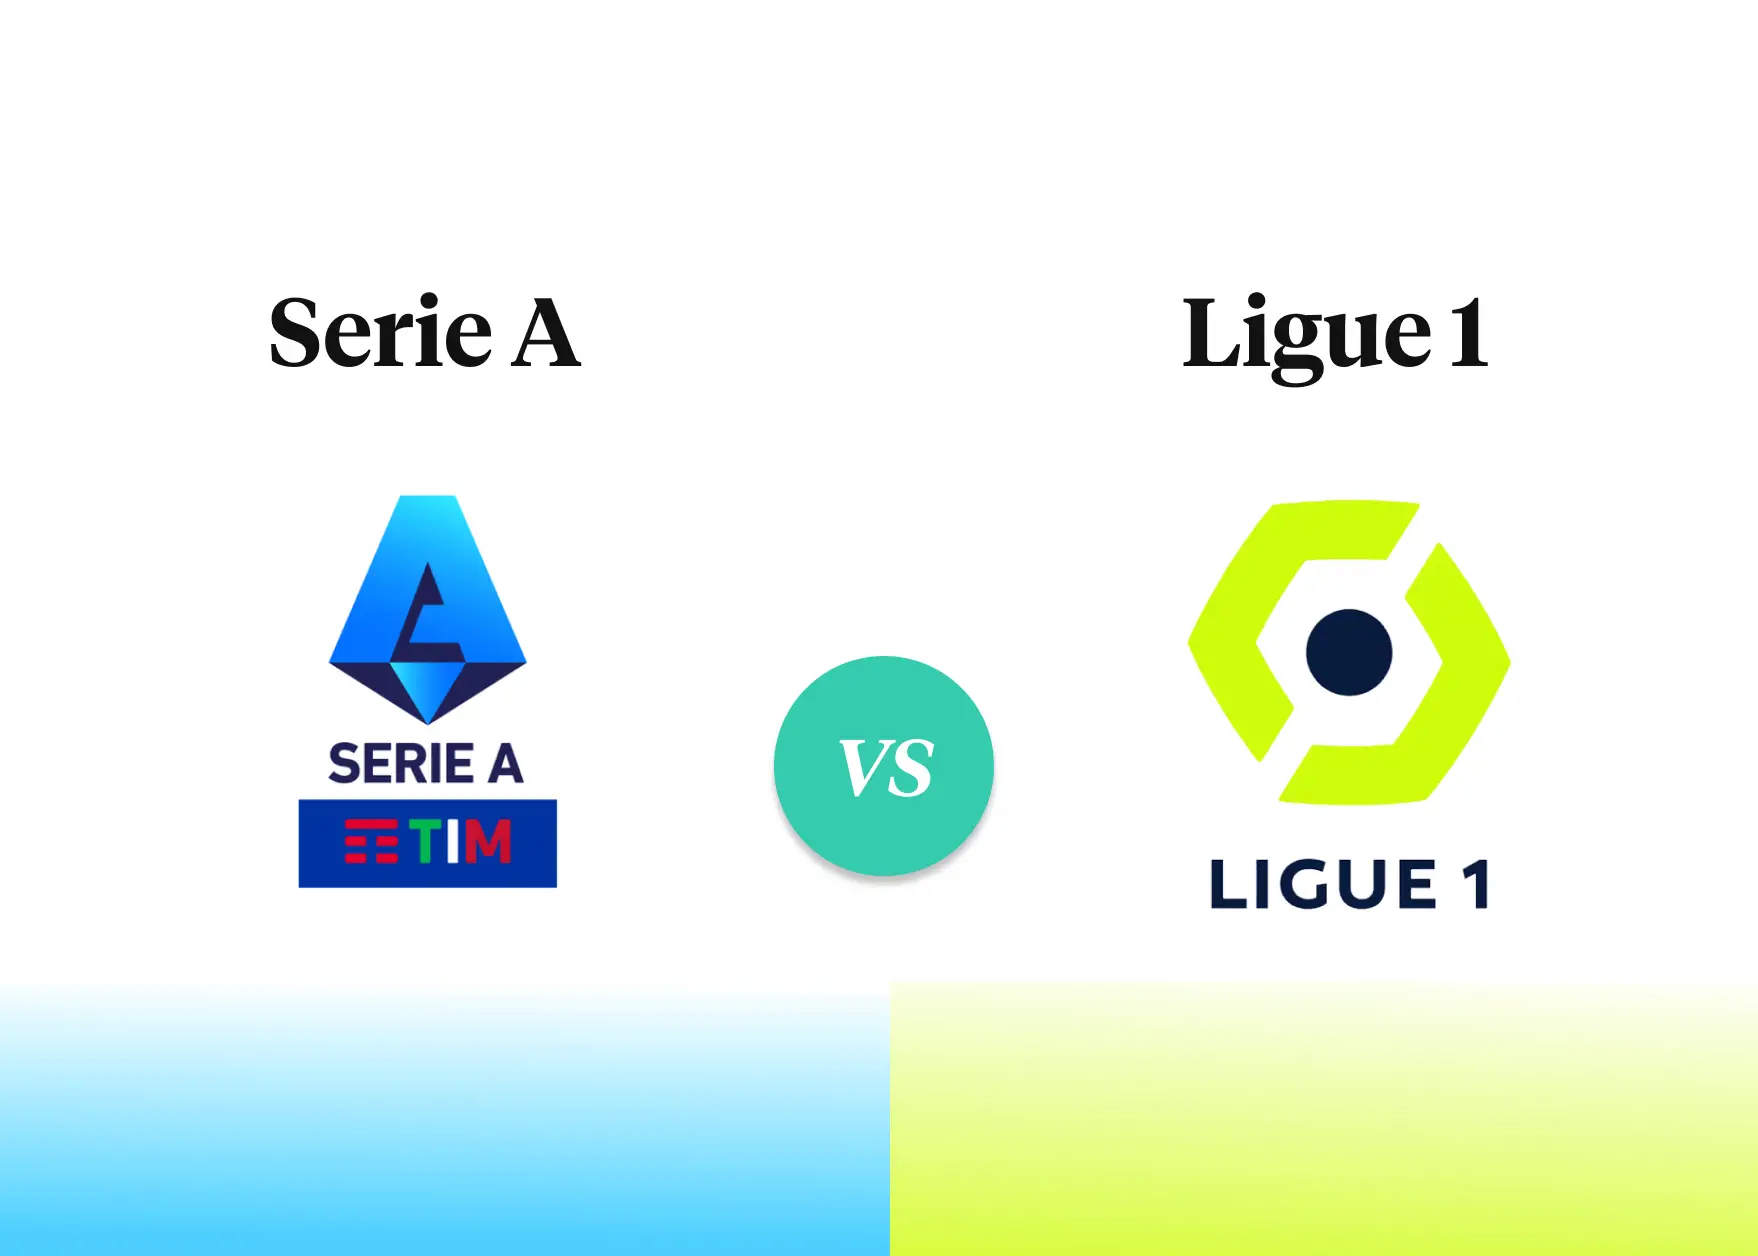 Serie A vs Ligue 1 - What's The Difference? - Football Handbook